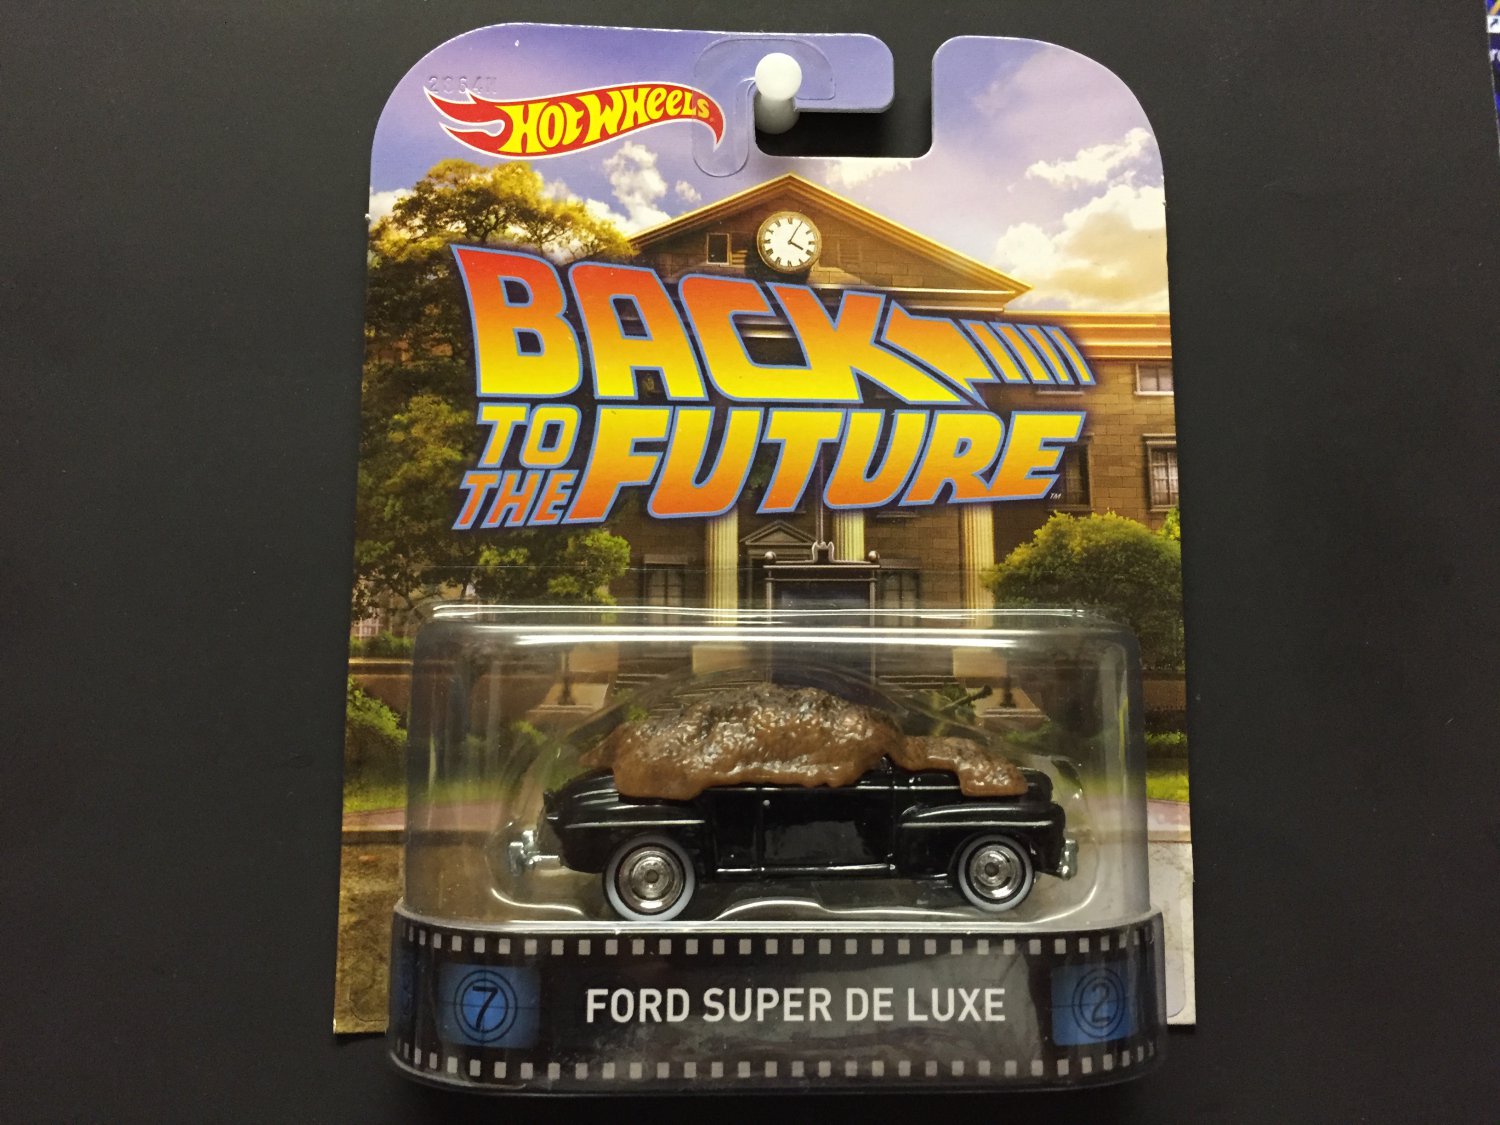 back to the future ford super deluxe